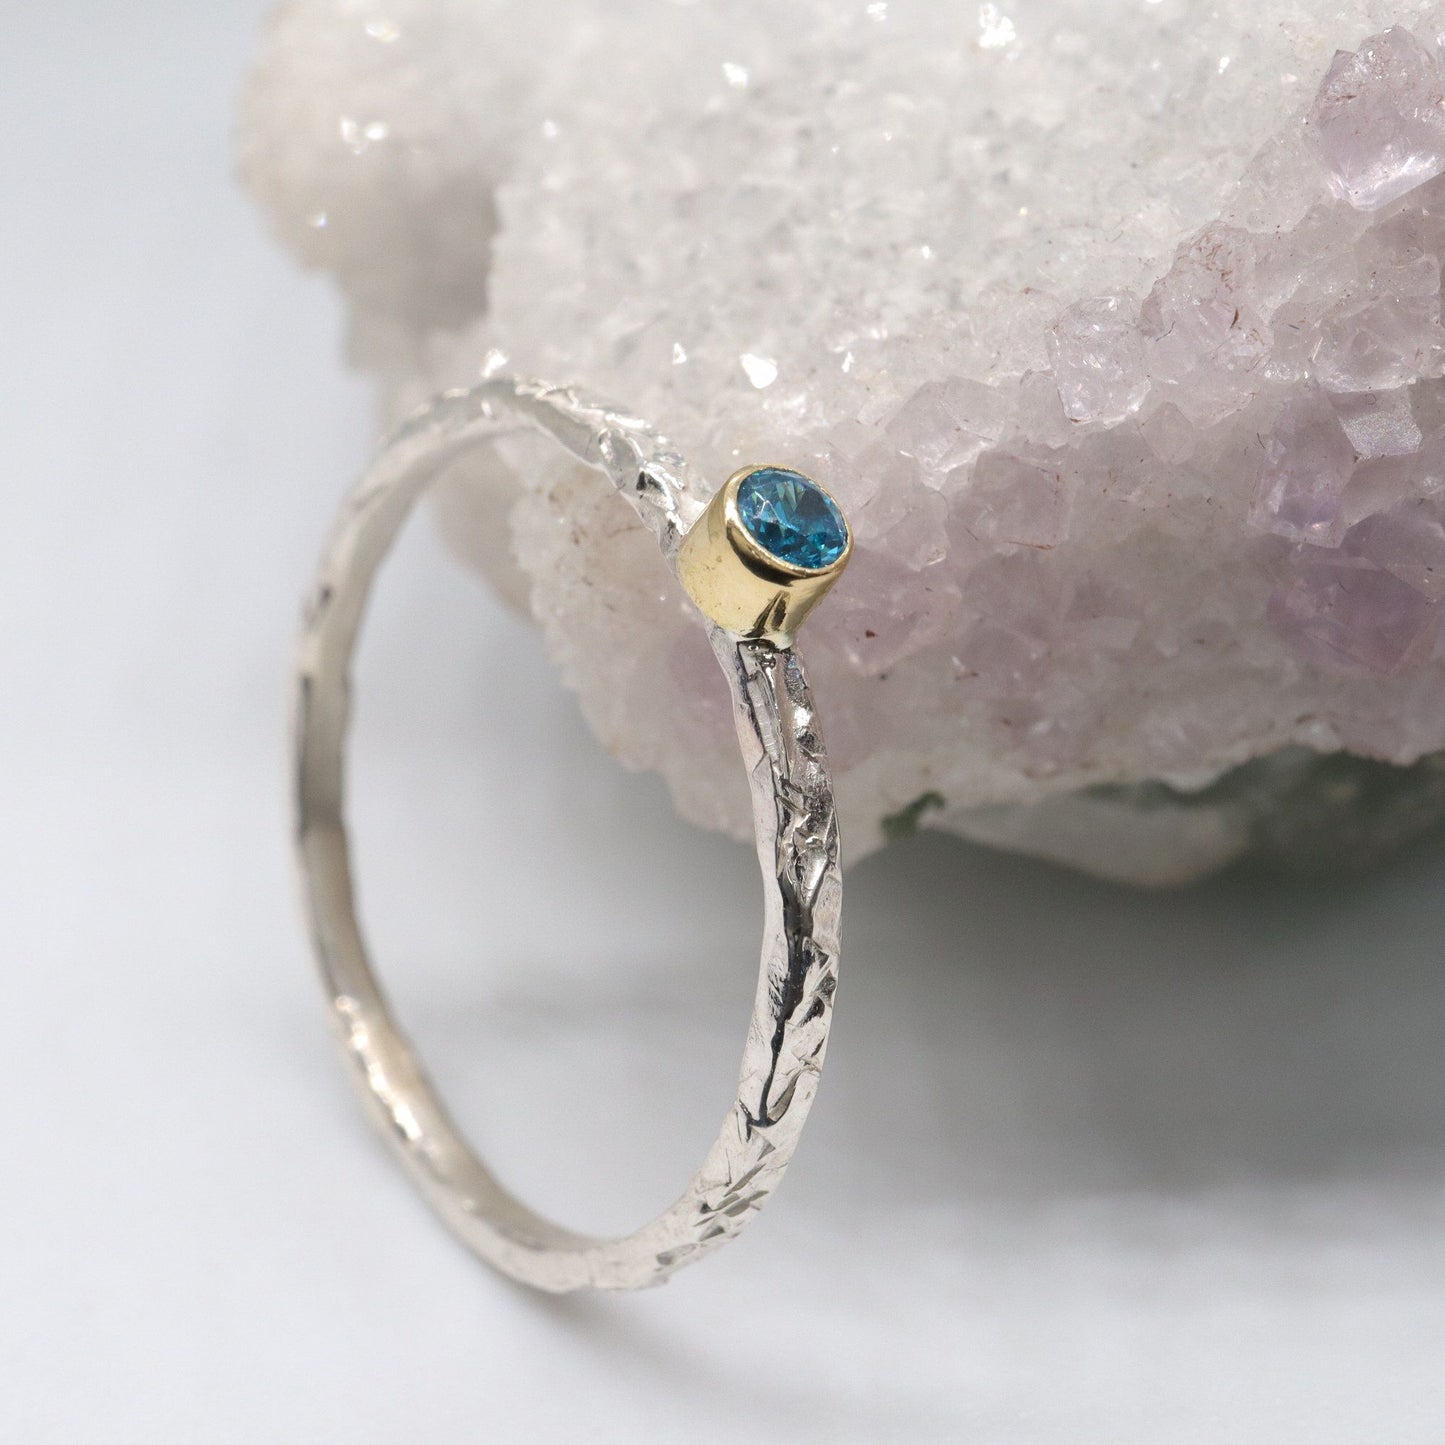 Blue Topaz 18ct gold and silver stacking ring, Striding Edge design.